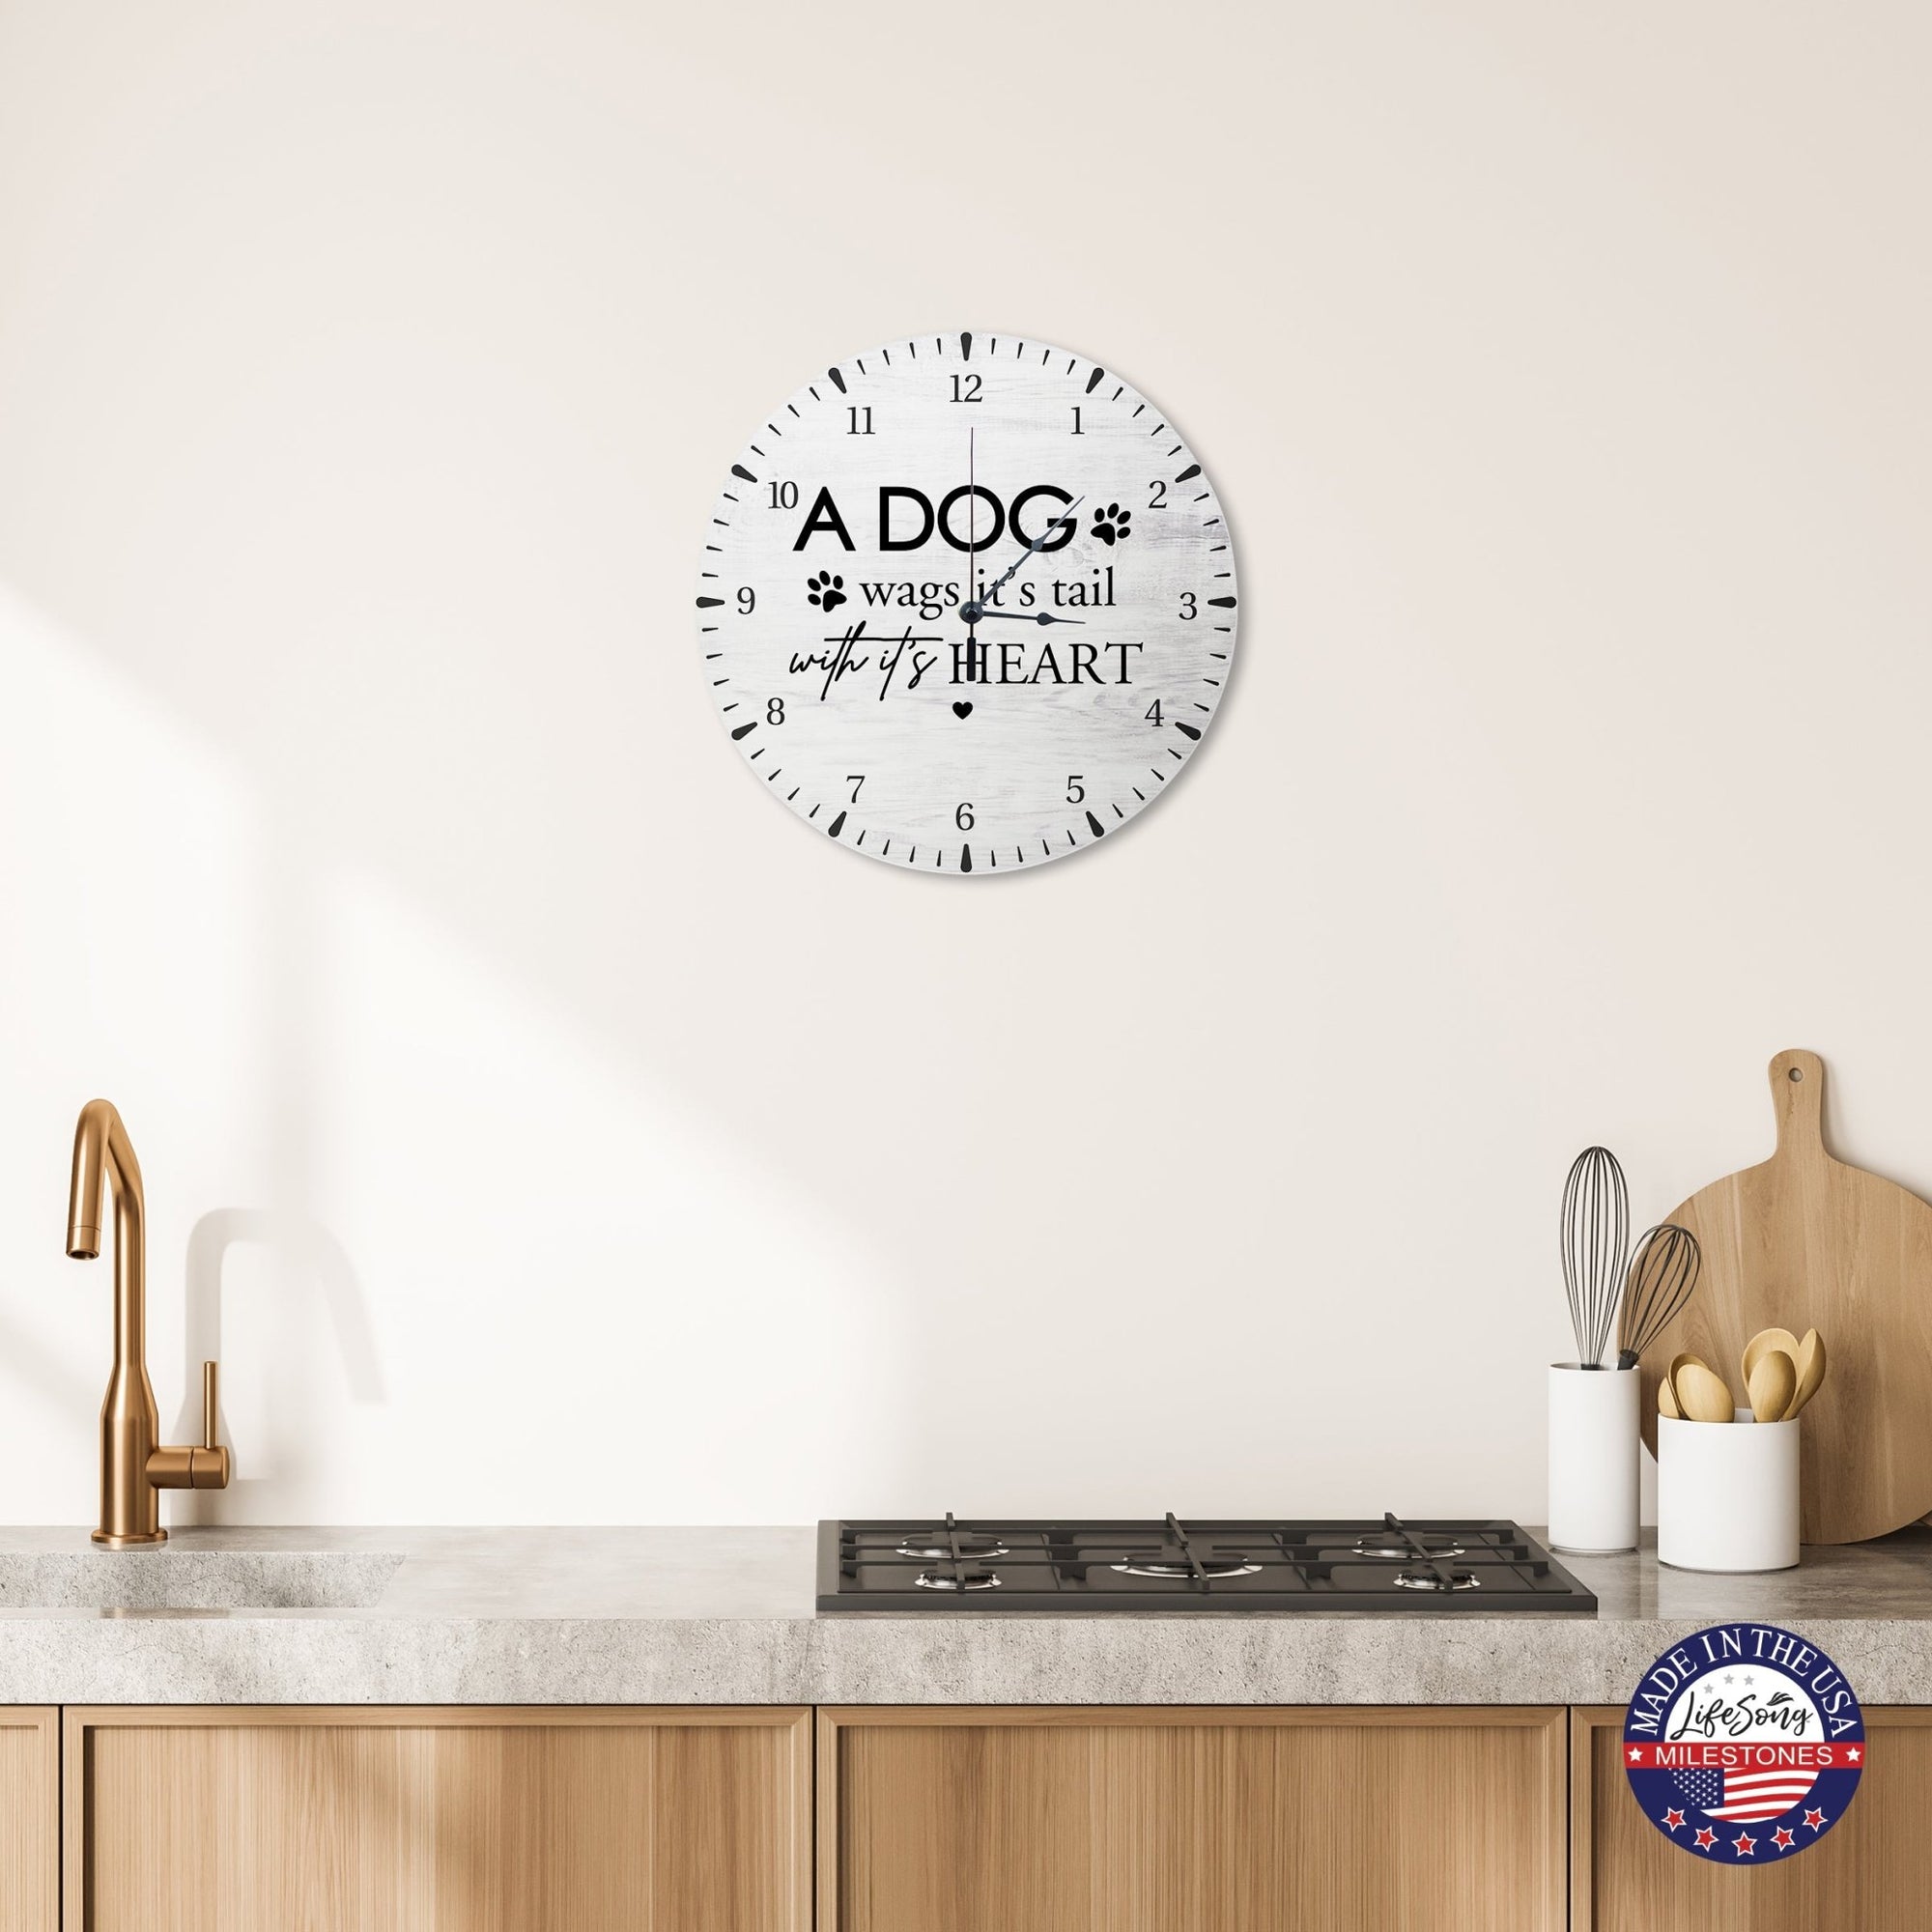 Minimalist Roman Numeral Wooden Clock For Walls Or Countertop Display For Pet Owners - A Dog Wags - LifeSong Milestones